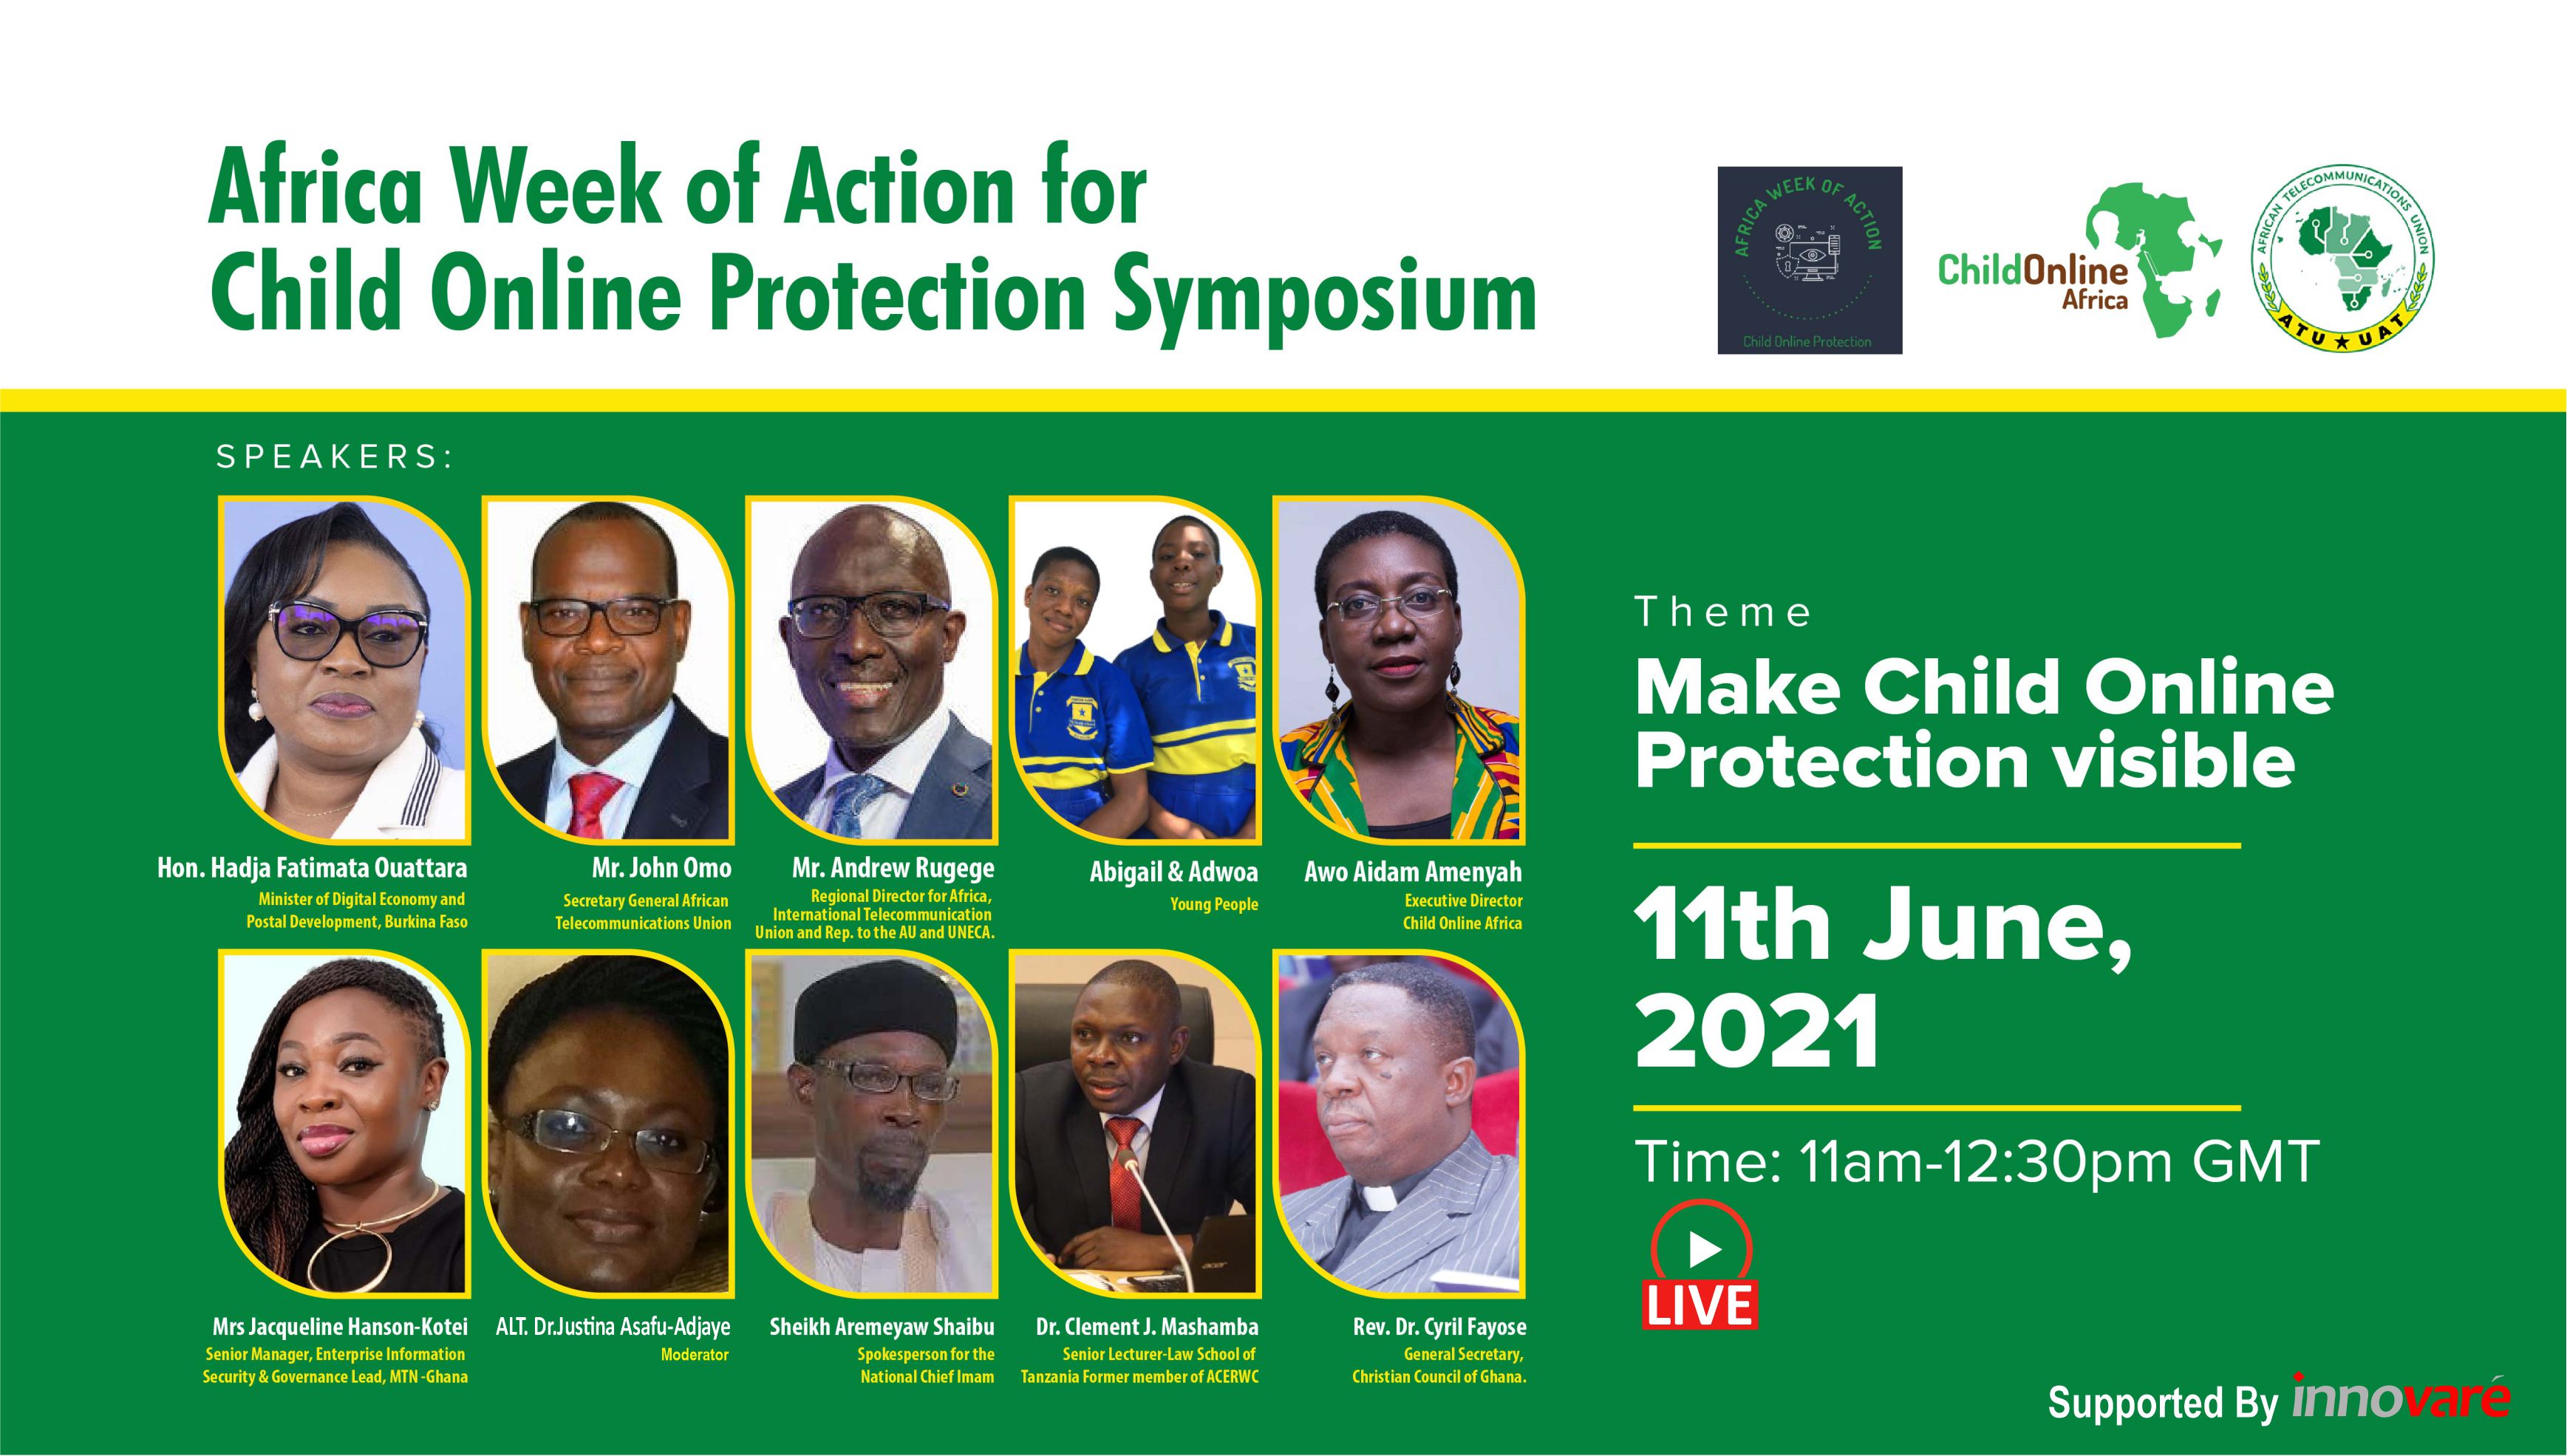 Africa Week of Action For Child Online Protection Symposium 2021